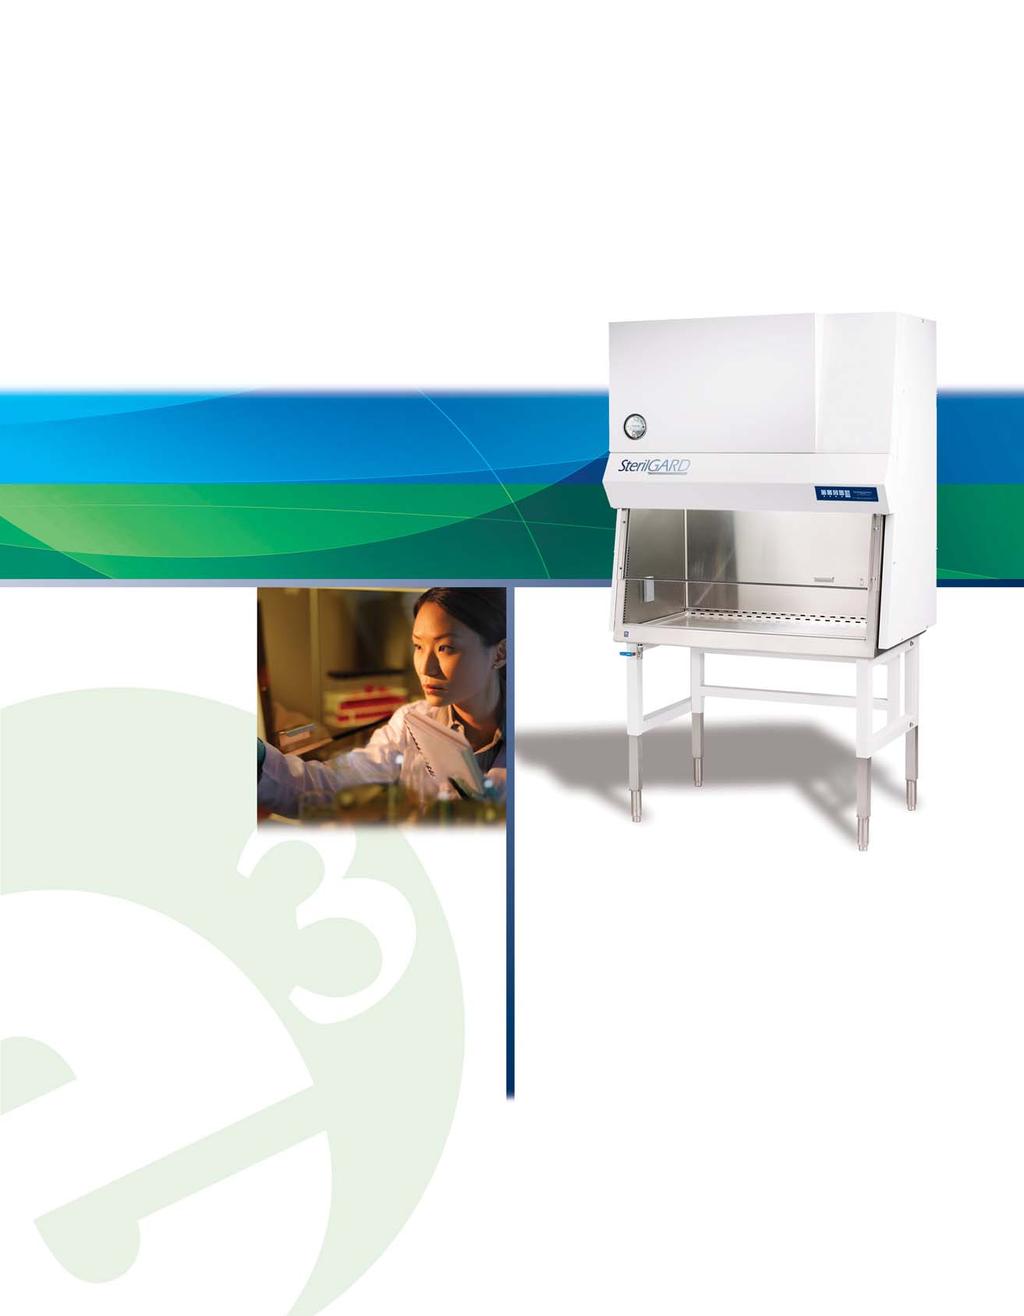 Class II, Type A2 Biological Safety Cabinet, Vertical Flow The better choice for an optimum balance of